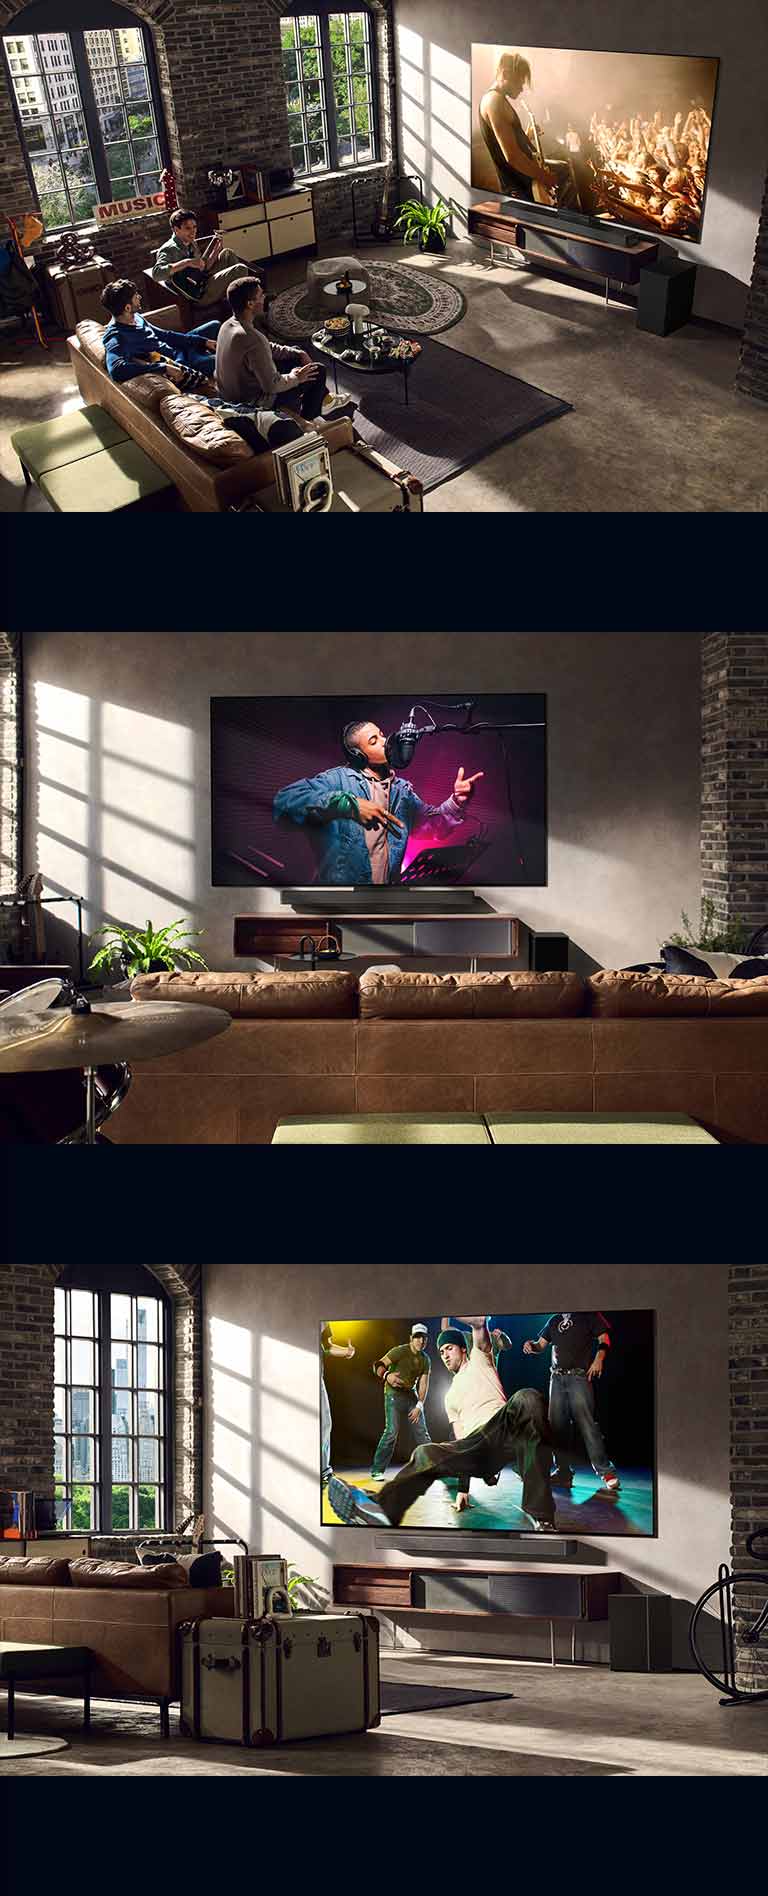 There are three lifestyle images. From top to bottom: three men are enjoying a concert video in the living room. There's an LG TV on the wall displaying a music recording scene, and the LG TV on the wall showing a breaking dance scene in a diagonal view.